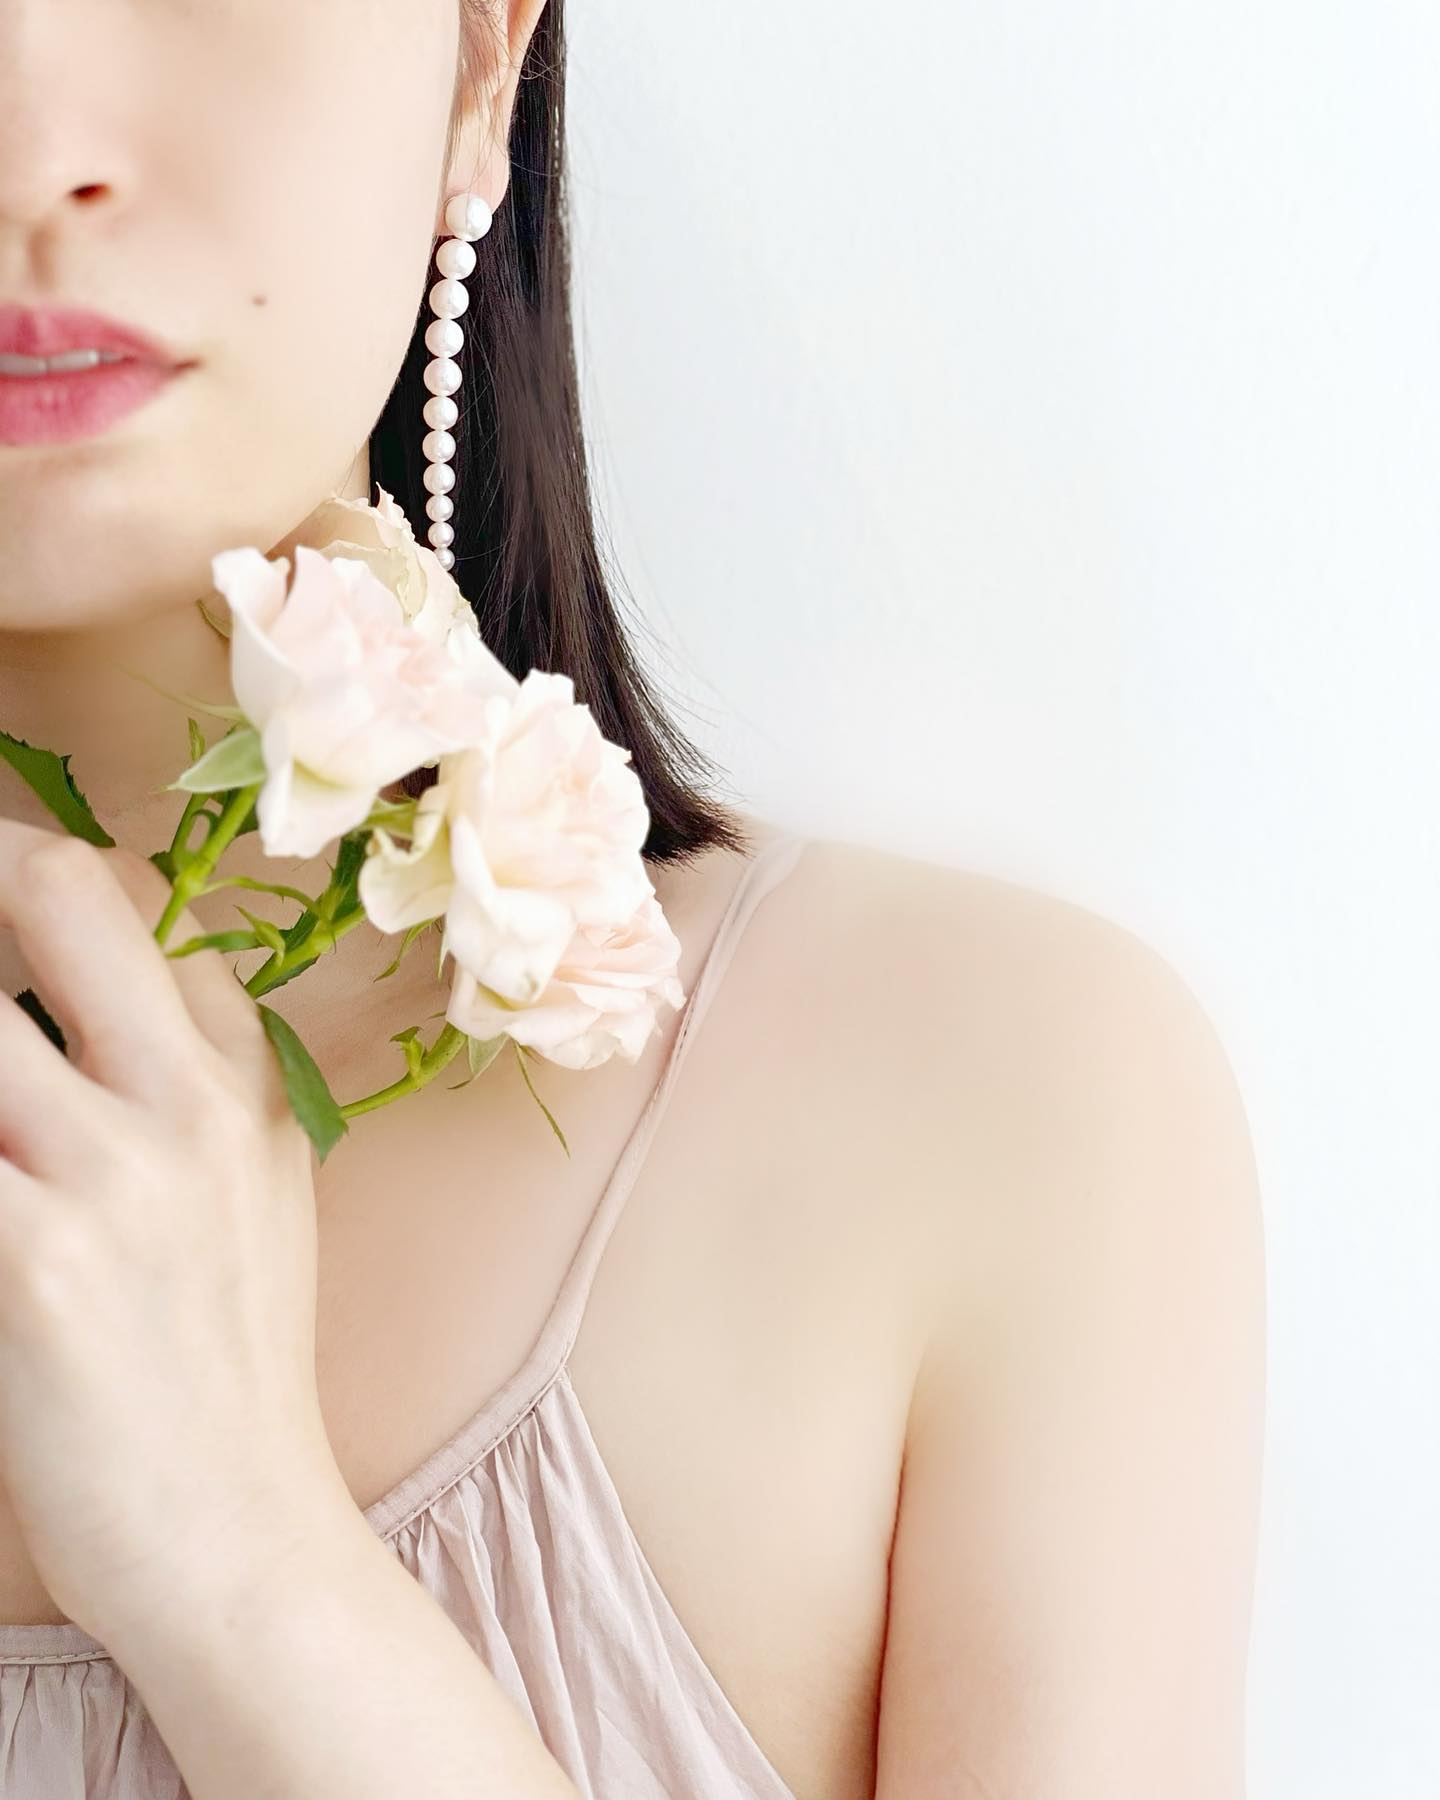 Woman wearing Akoya Gradation Earrings while holding some flowers